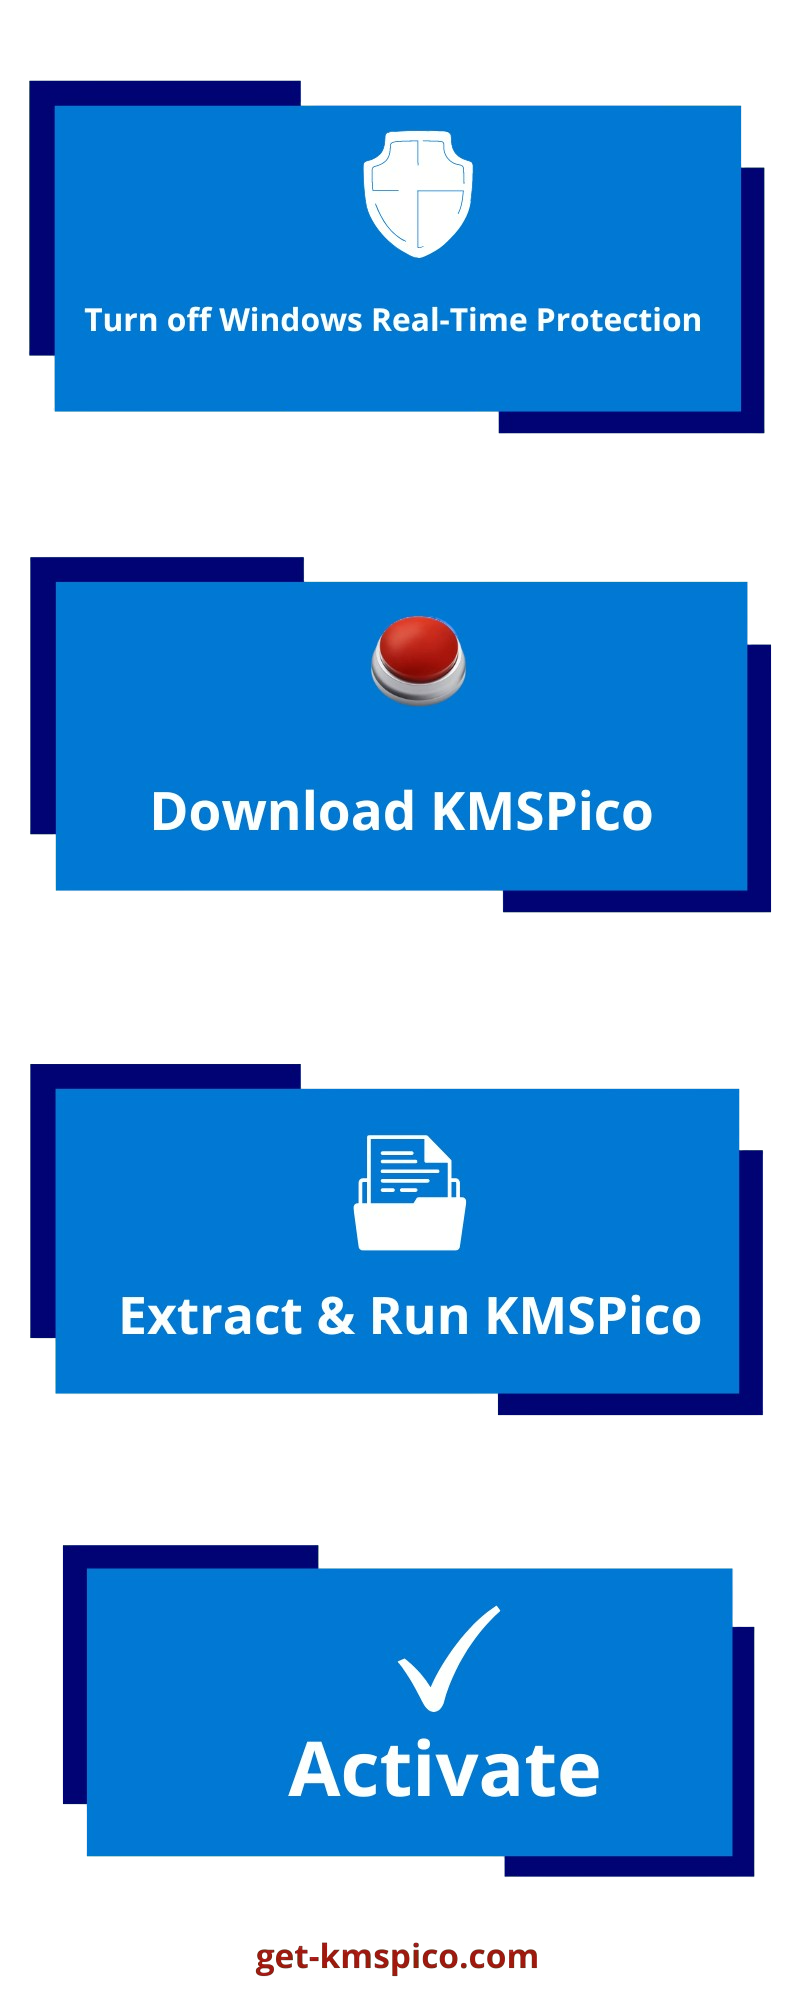 KMSPico-Guide-Infographic